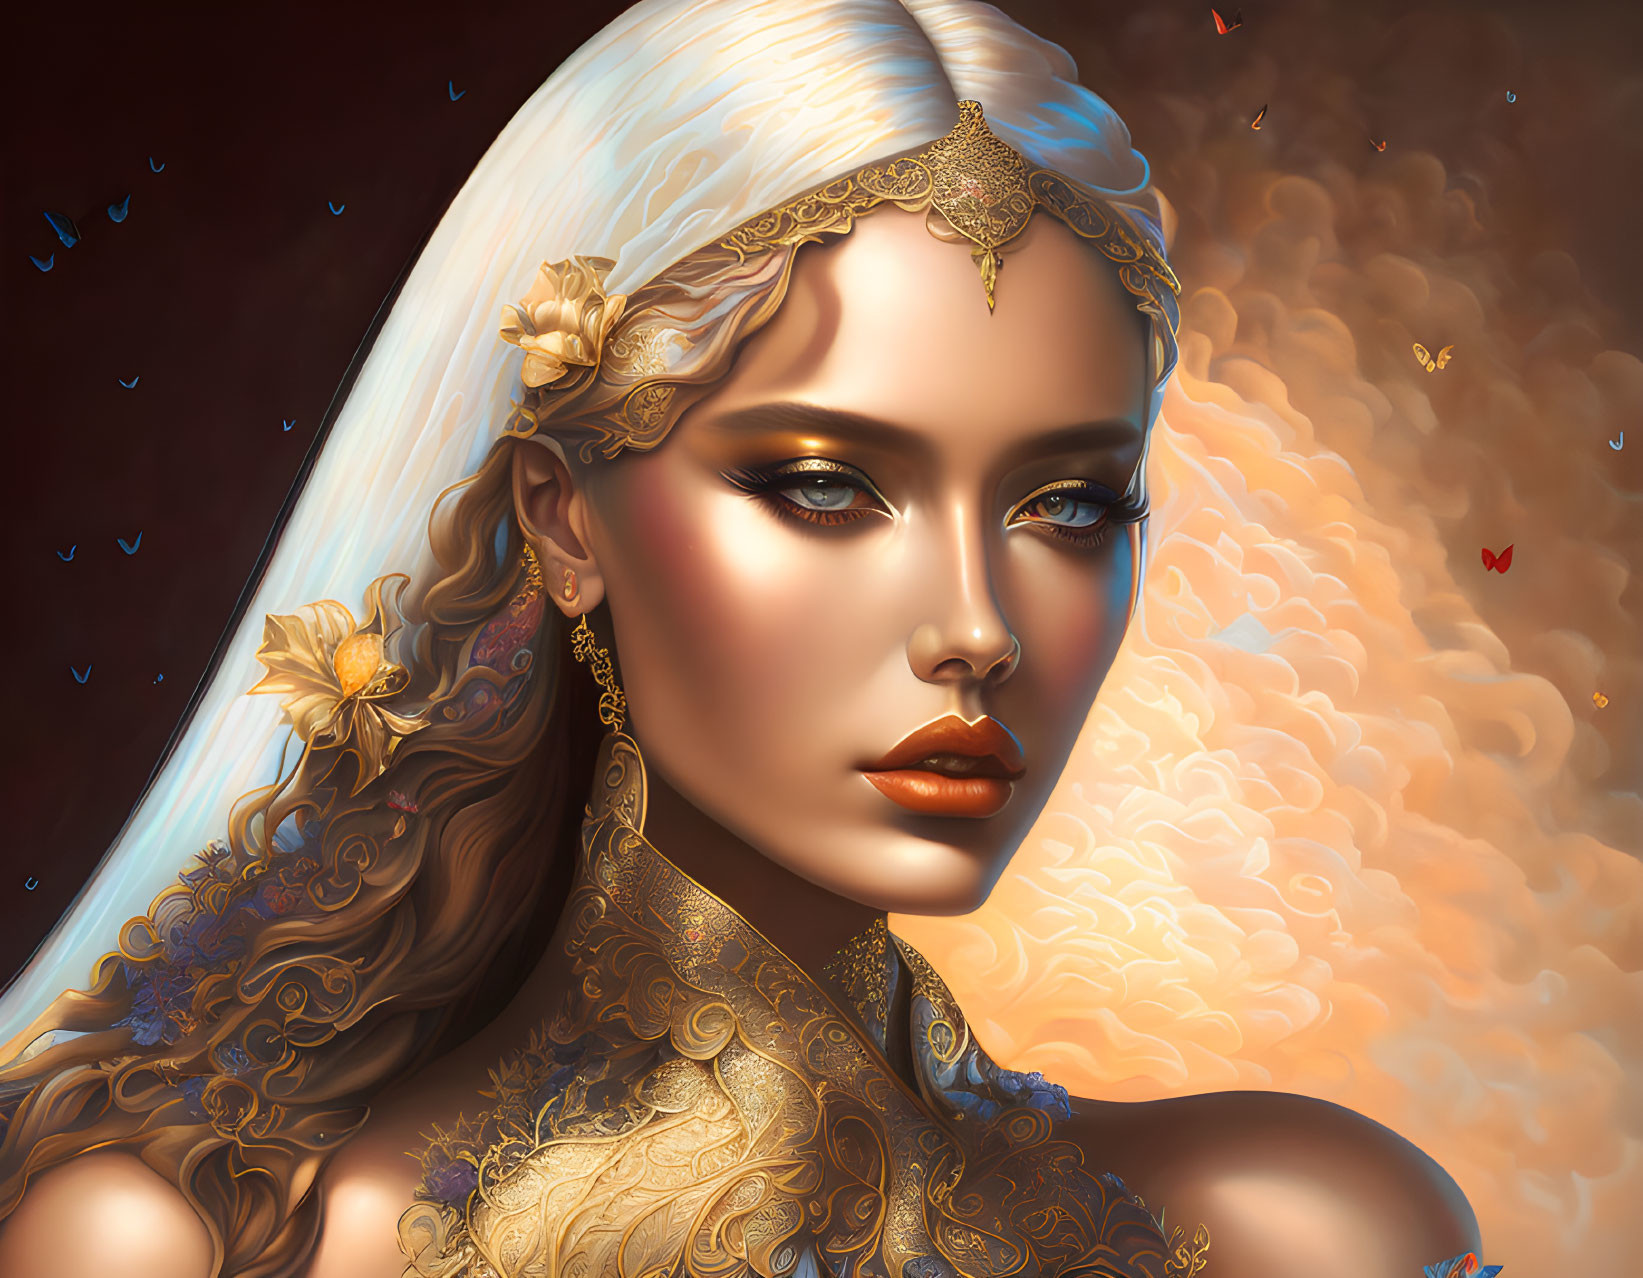 Woman with Golden Jewelry and Striking Gaze Against Dramatic Sky